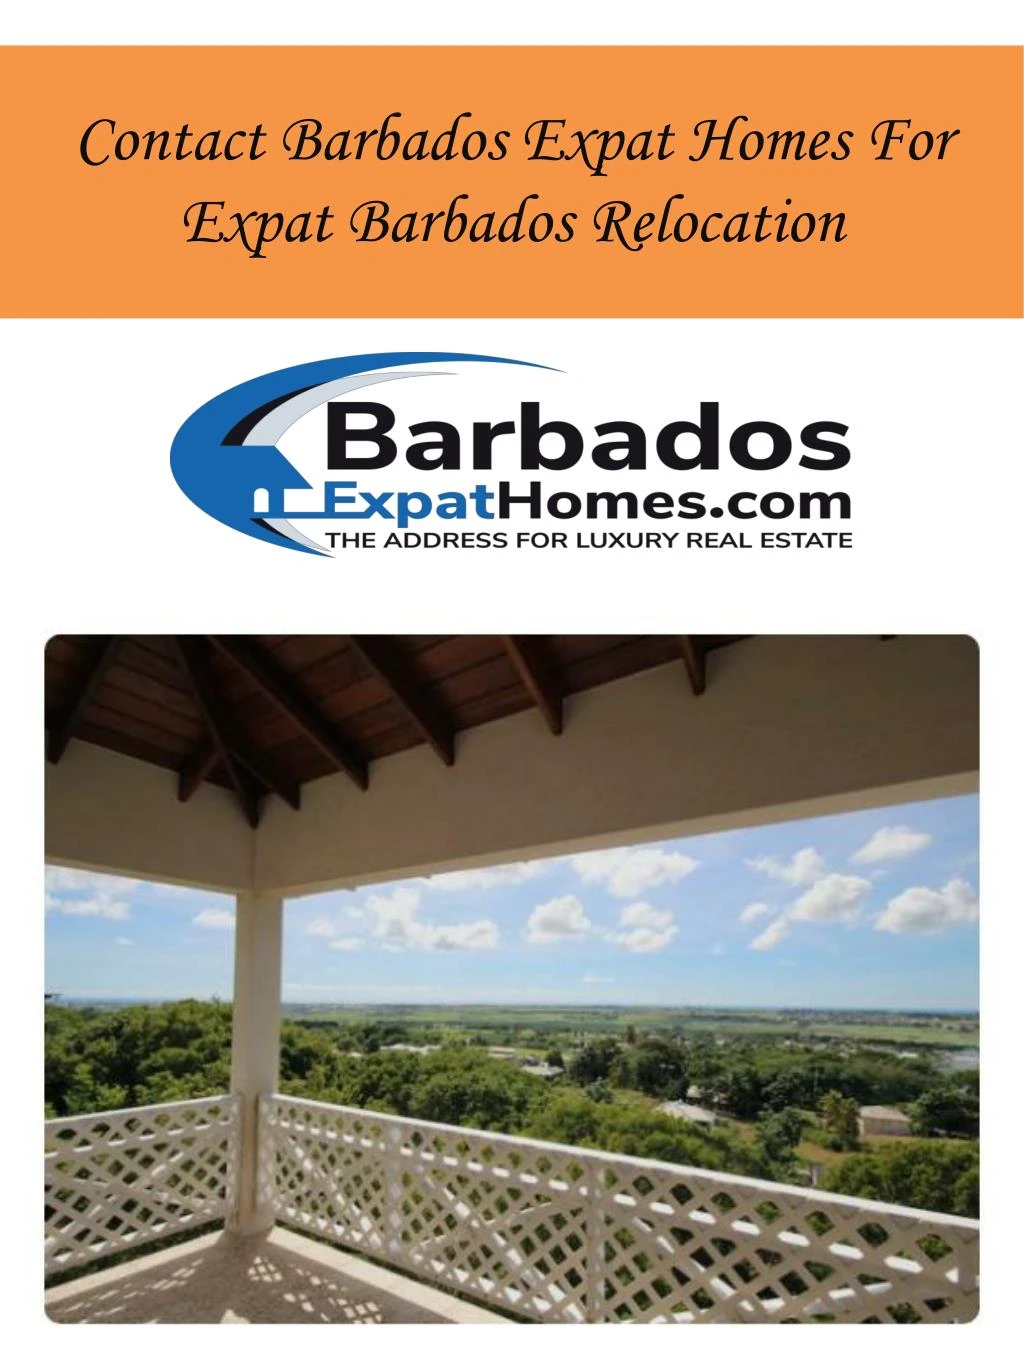 contact barbados expat homes for expat barbados relocation